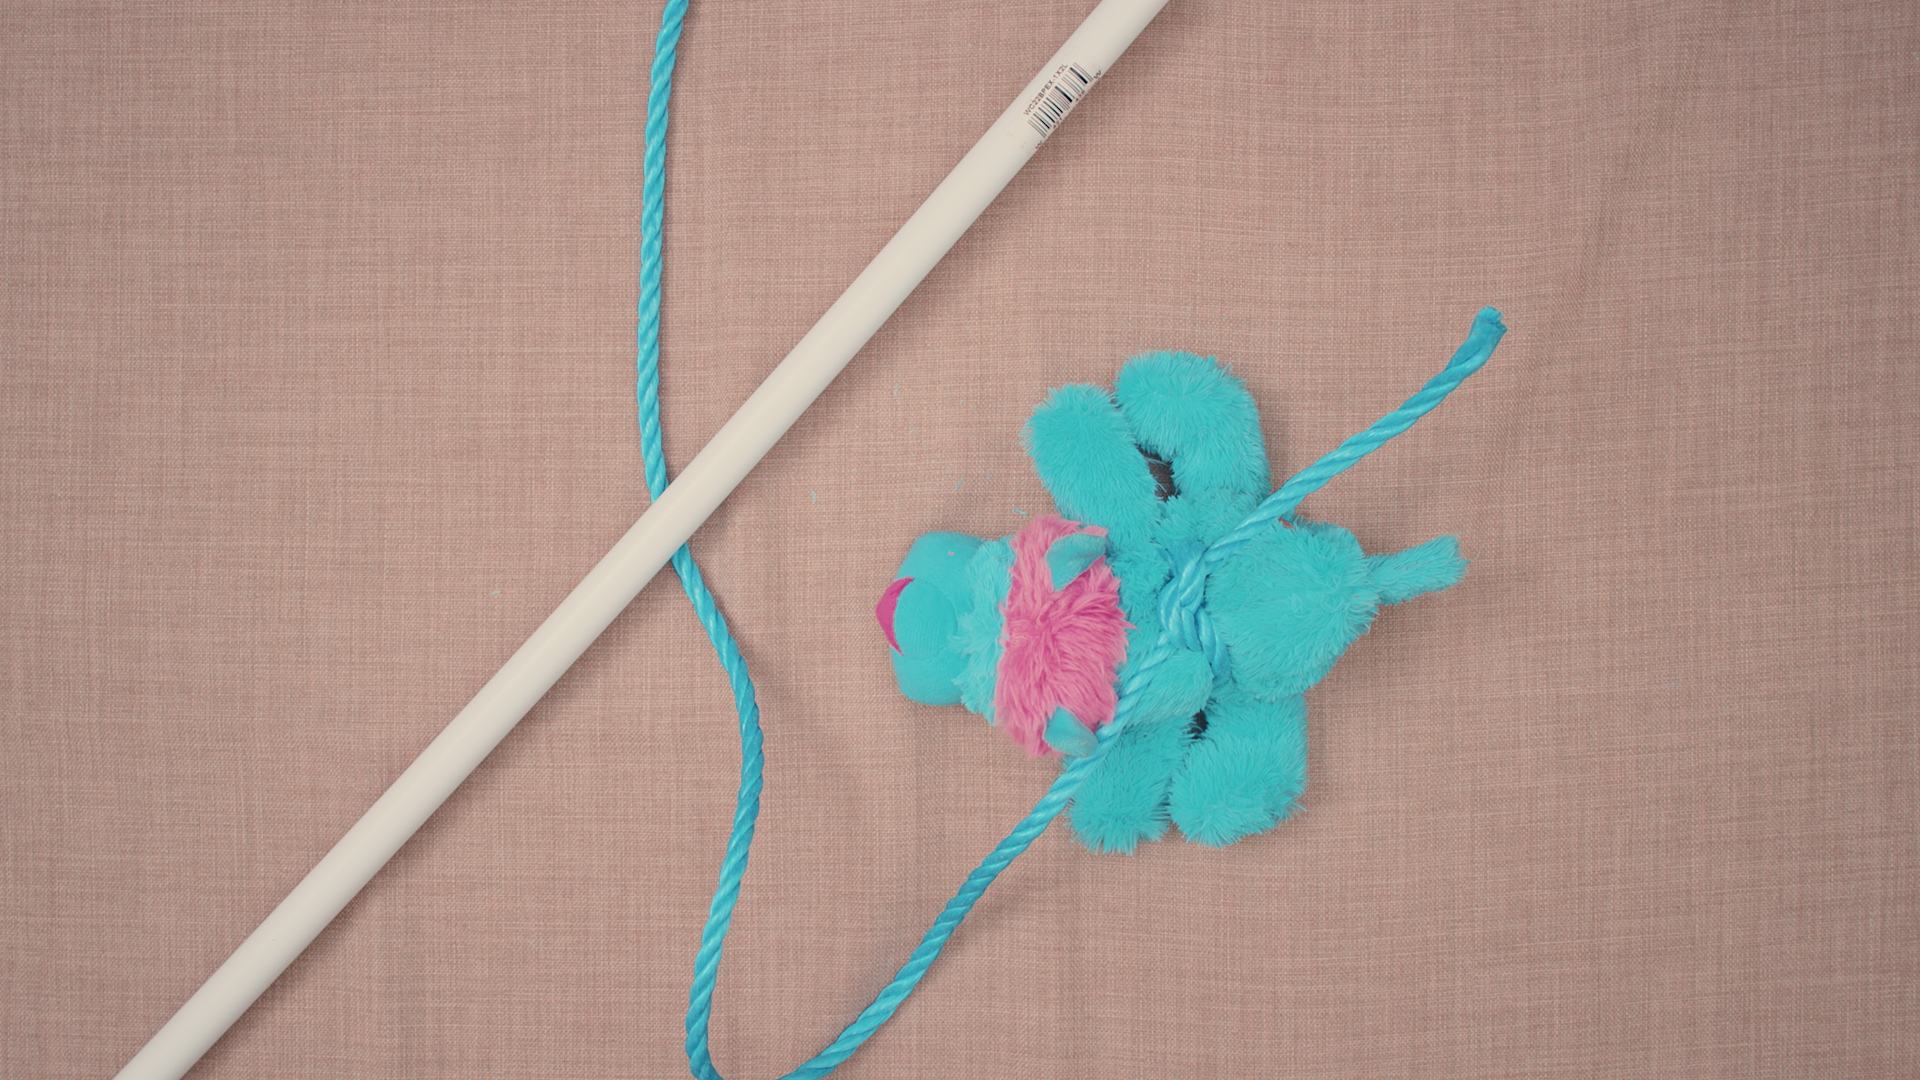 DIY flirt pole with blue fluffy toy attached